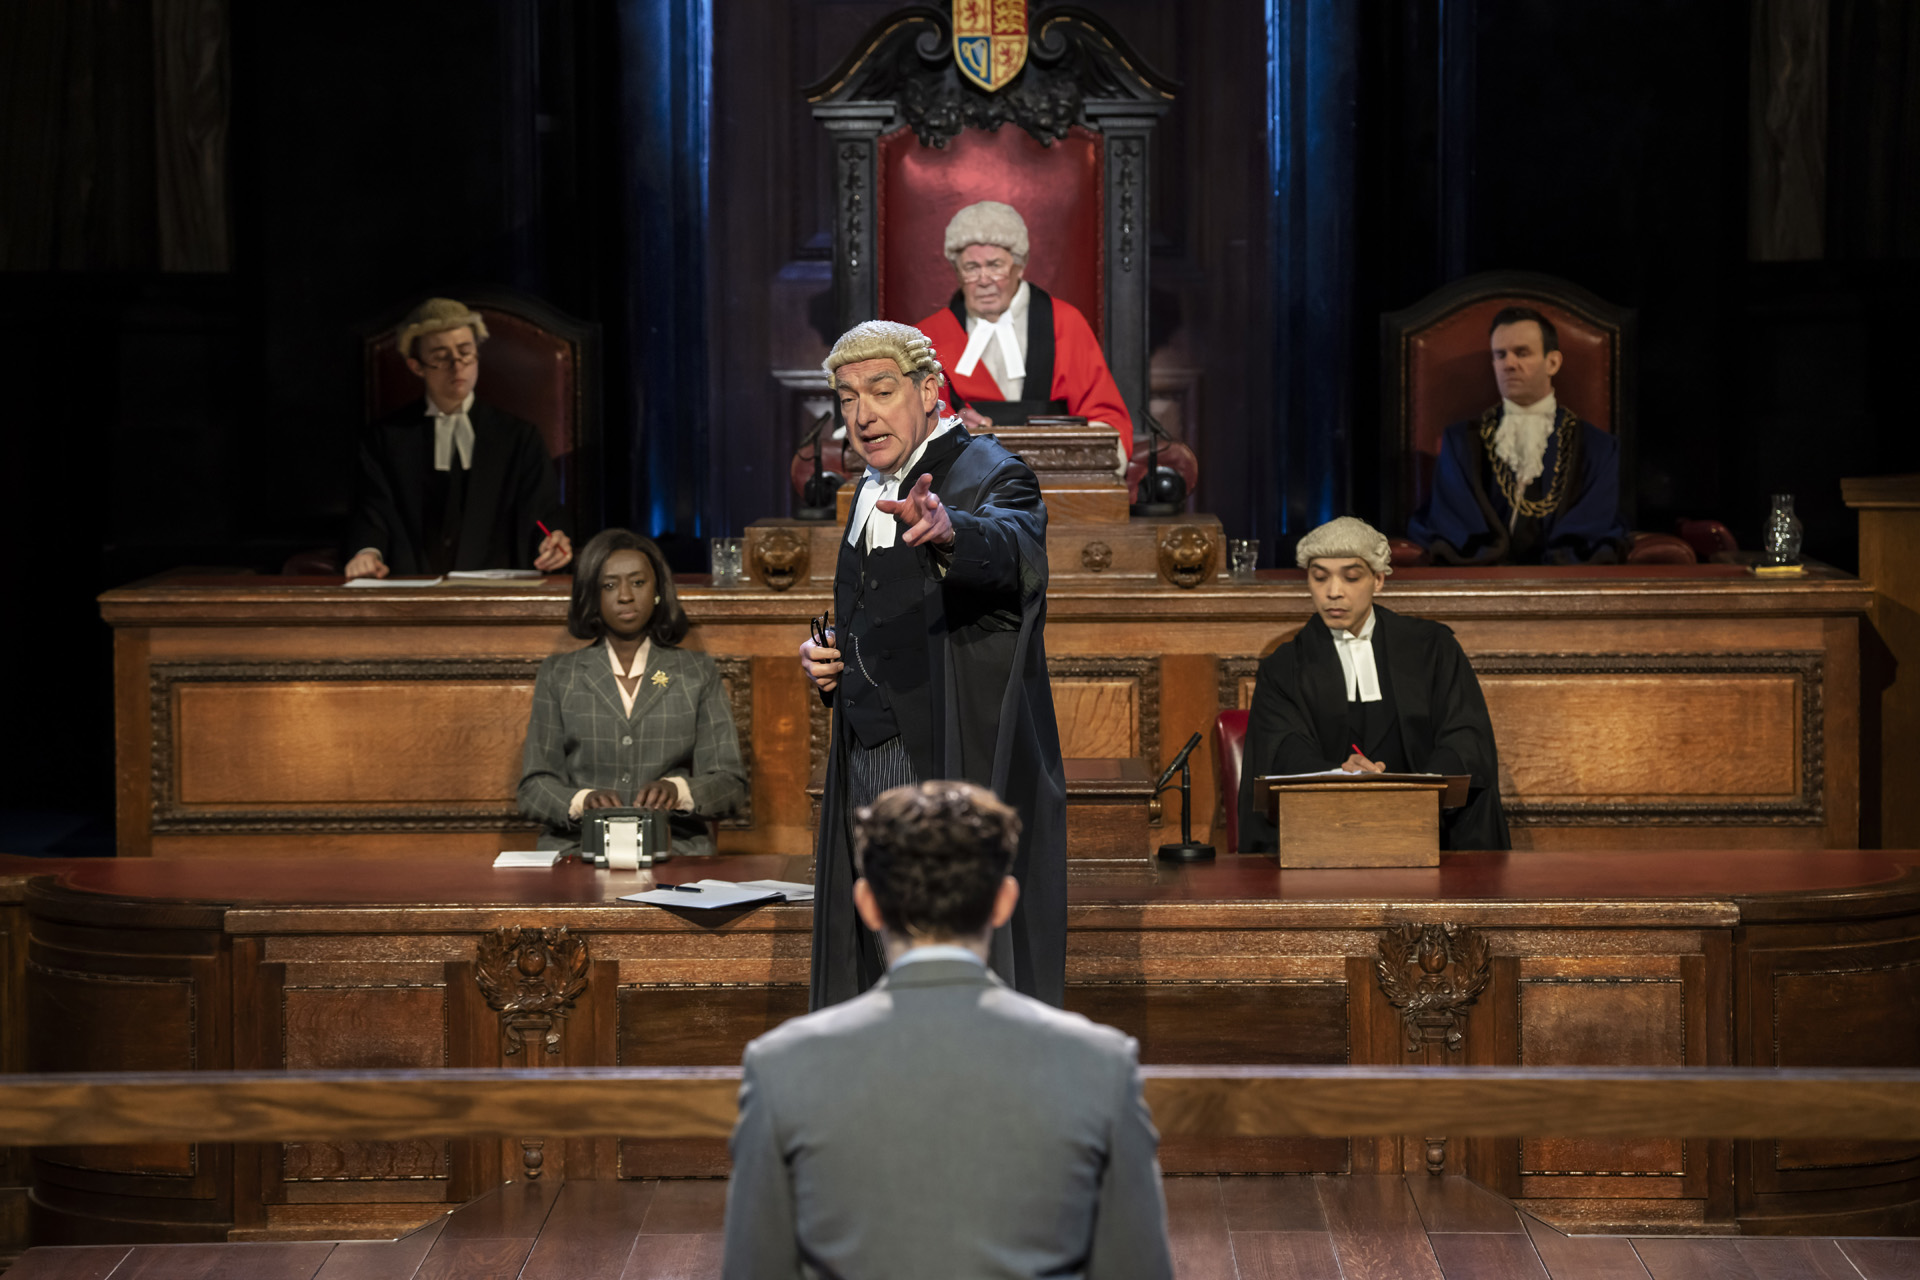 A performance of witness for the prosecution